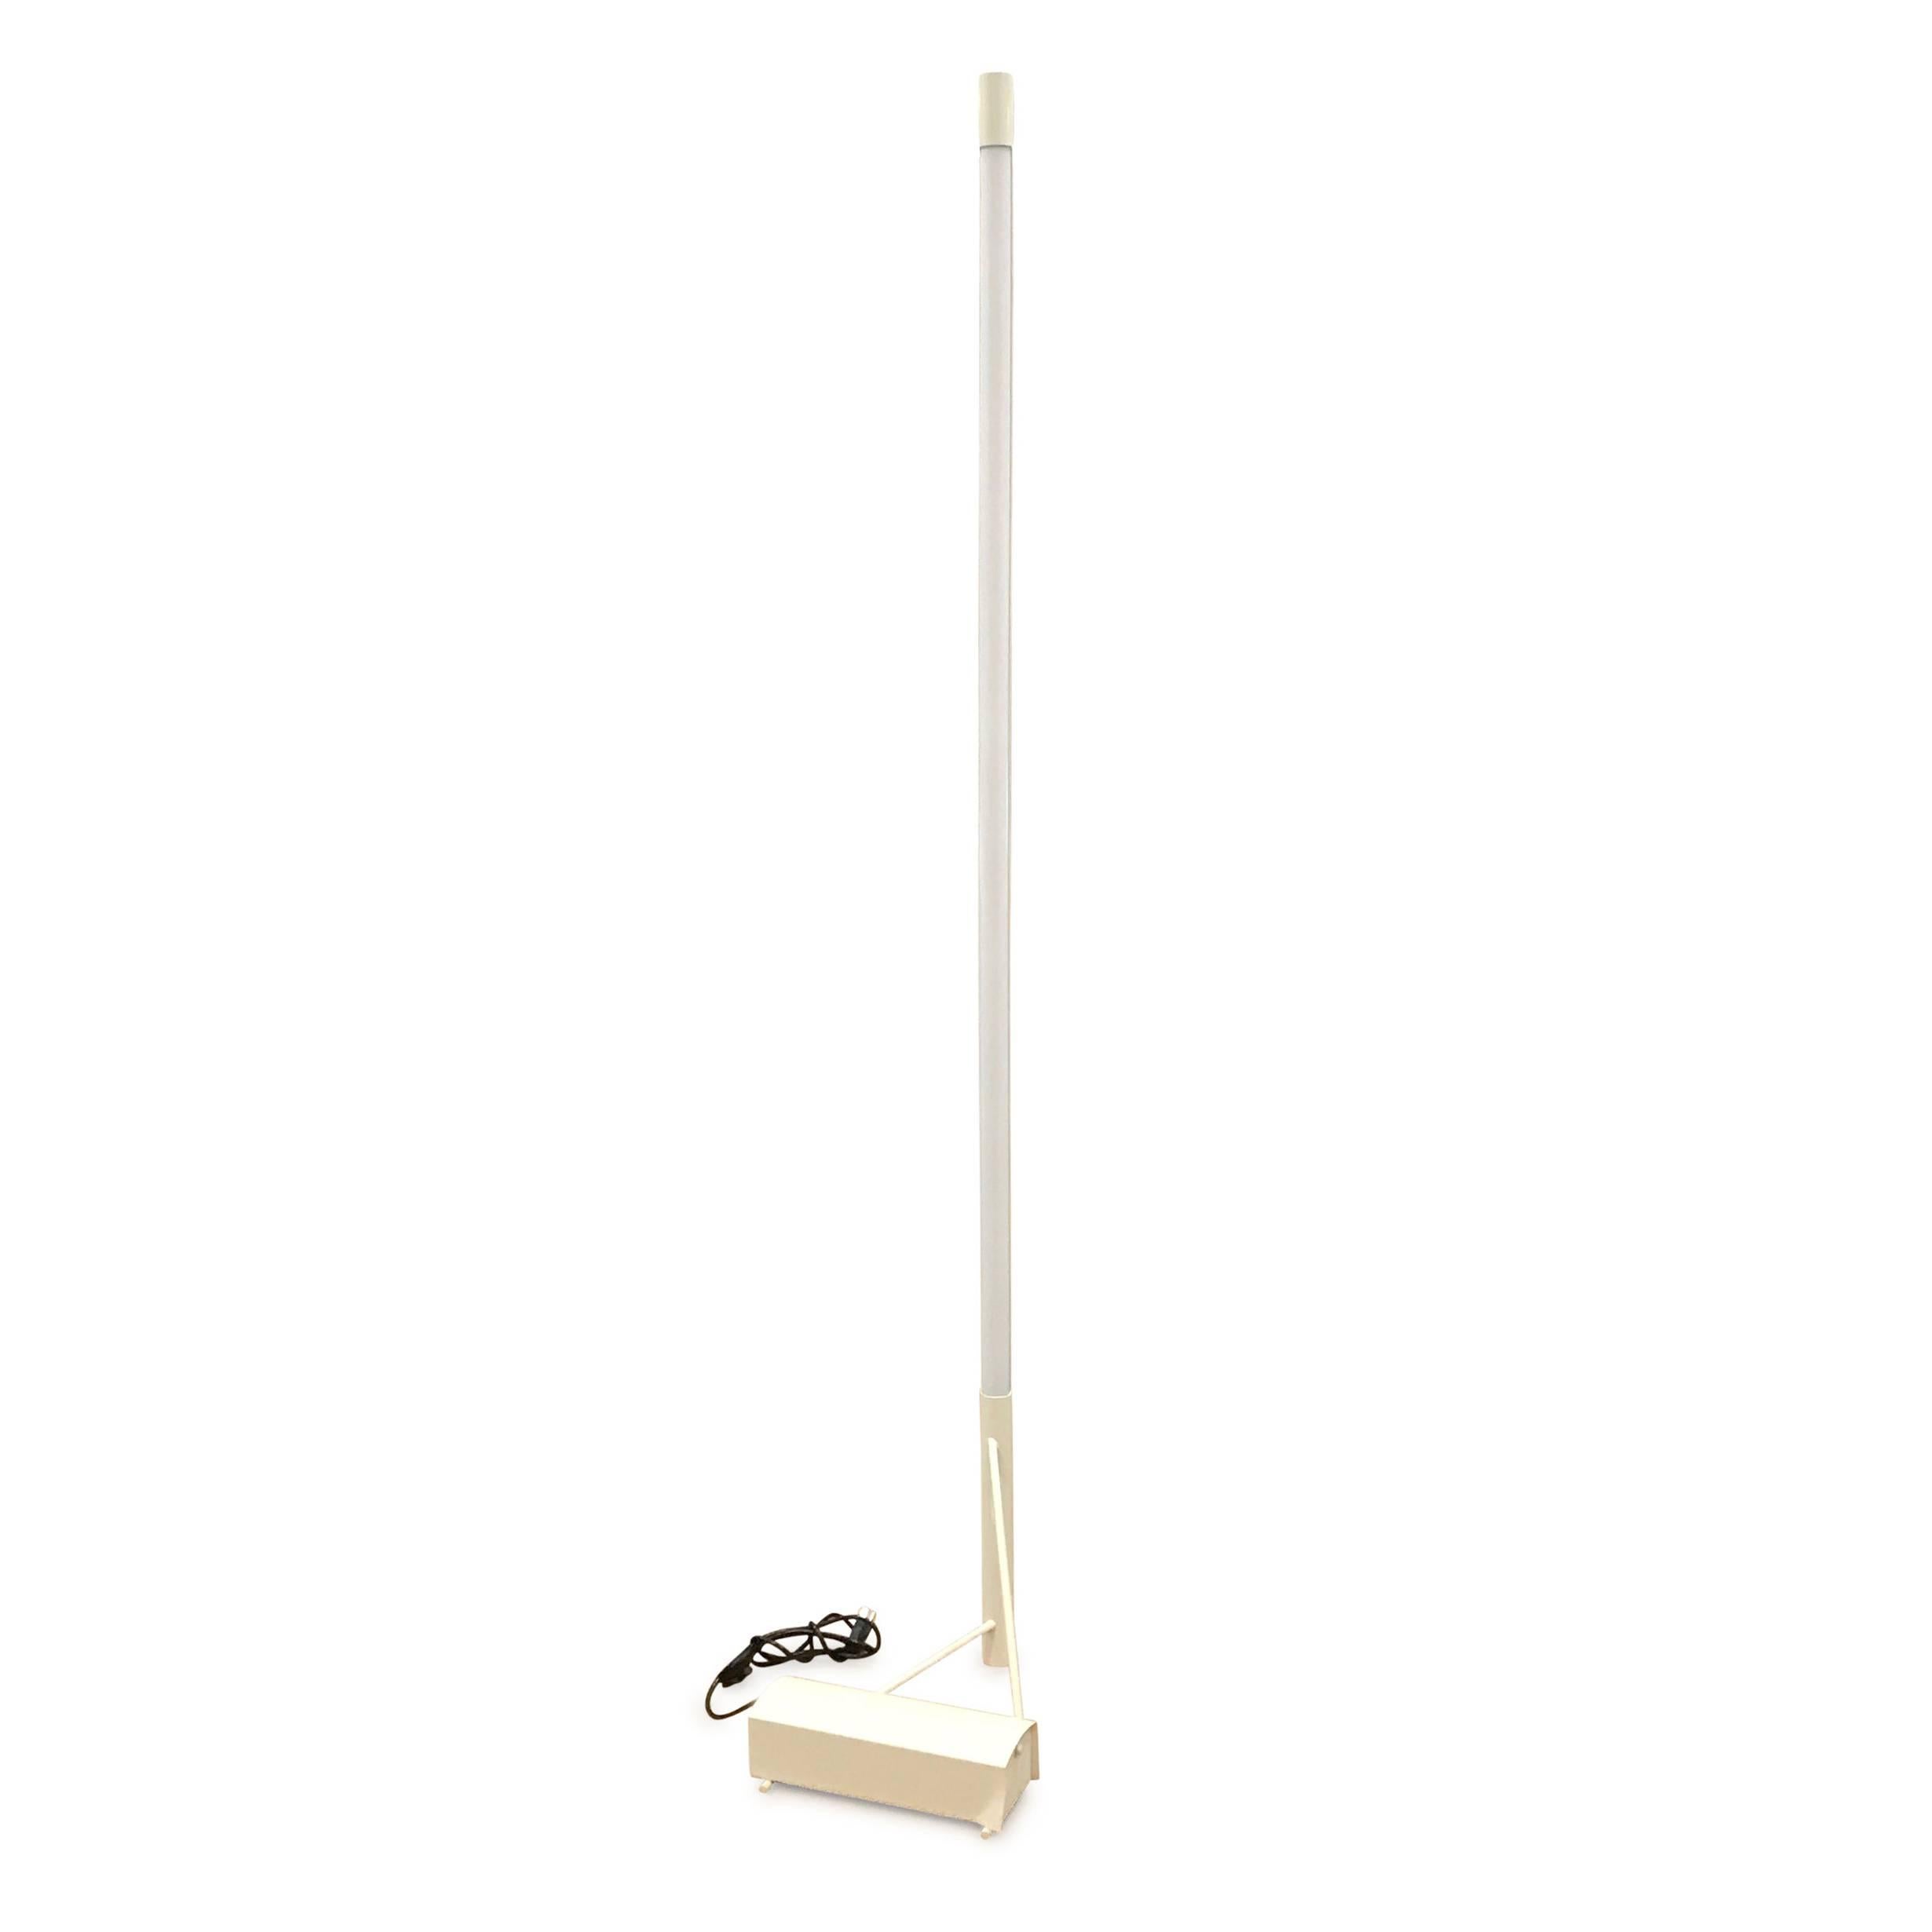 The renowned designer Gino Sarfatti created this ahead-of-its-time piece in 1954, and for more than 60 years its minimalistic Silhouette has complemented even the most modern homes and offices worldwide. The light source for this smart floor lamp is